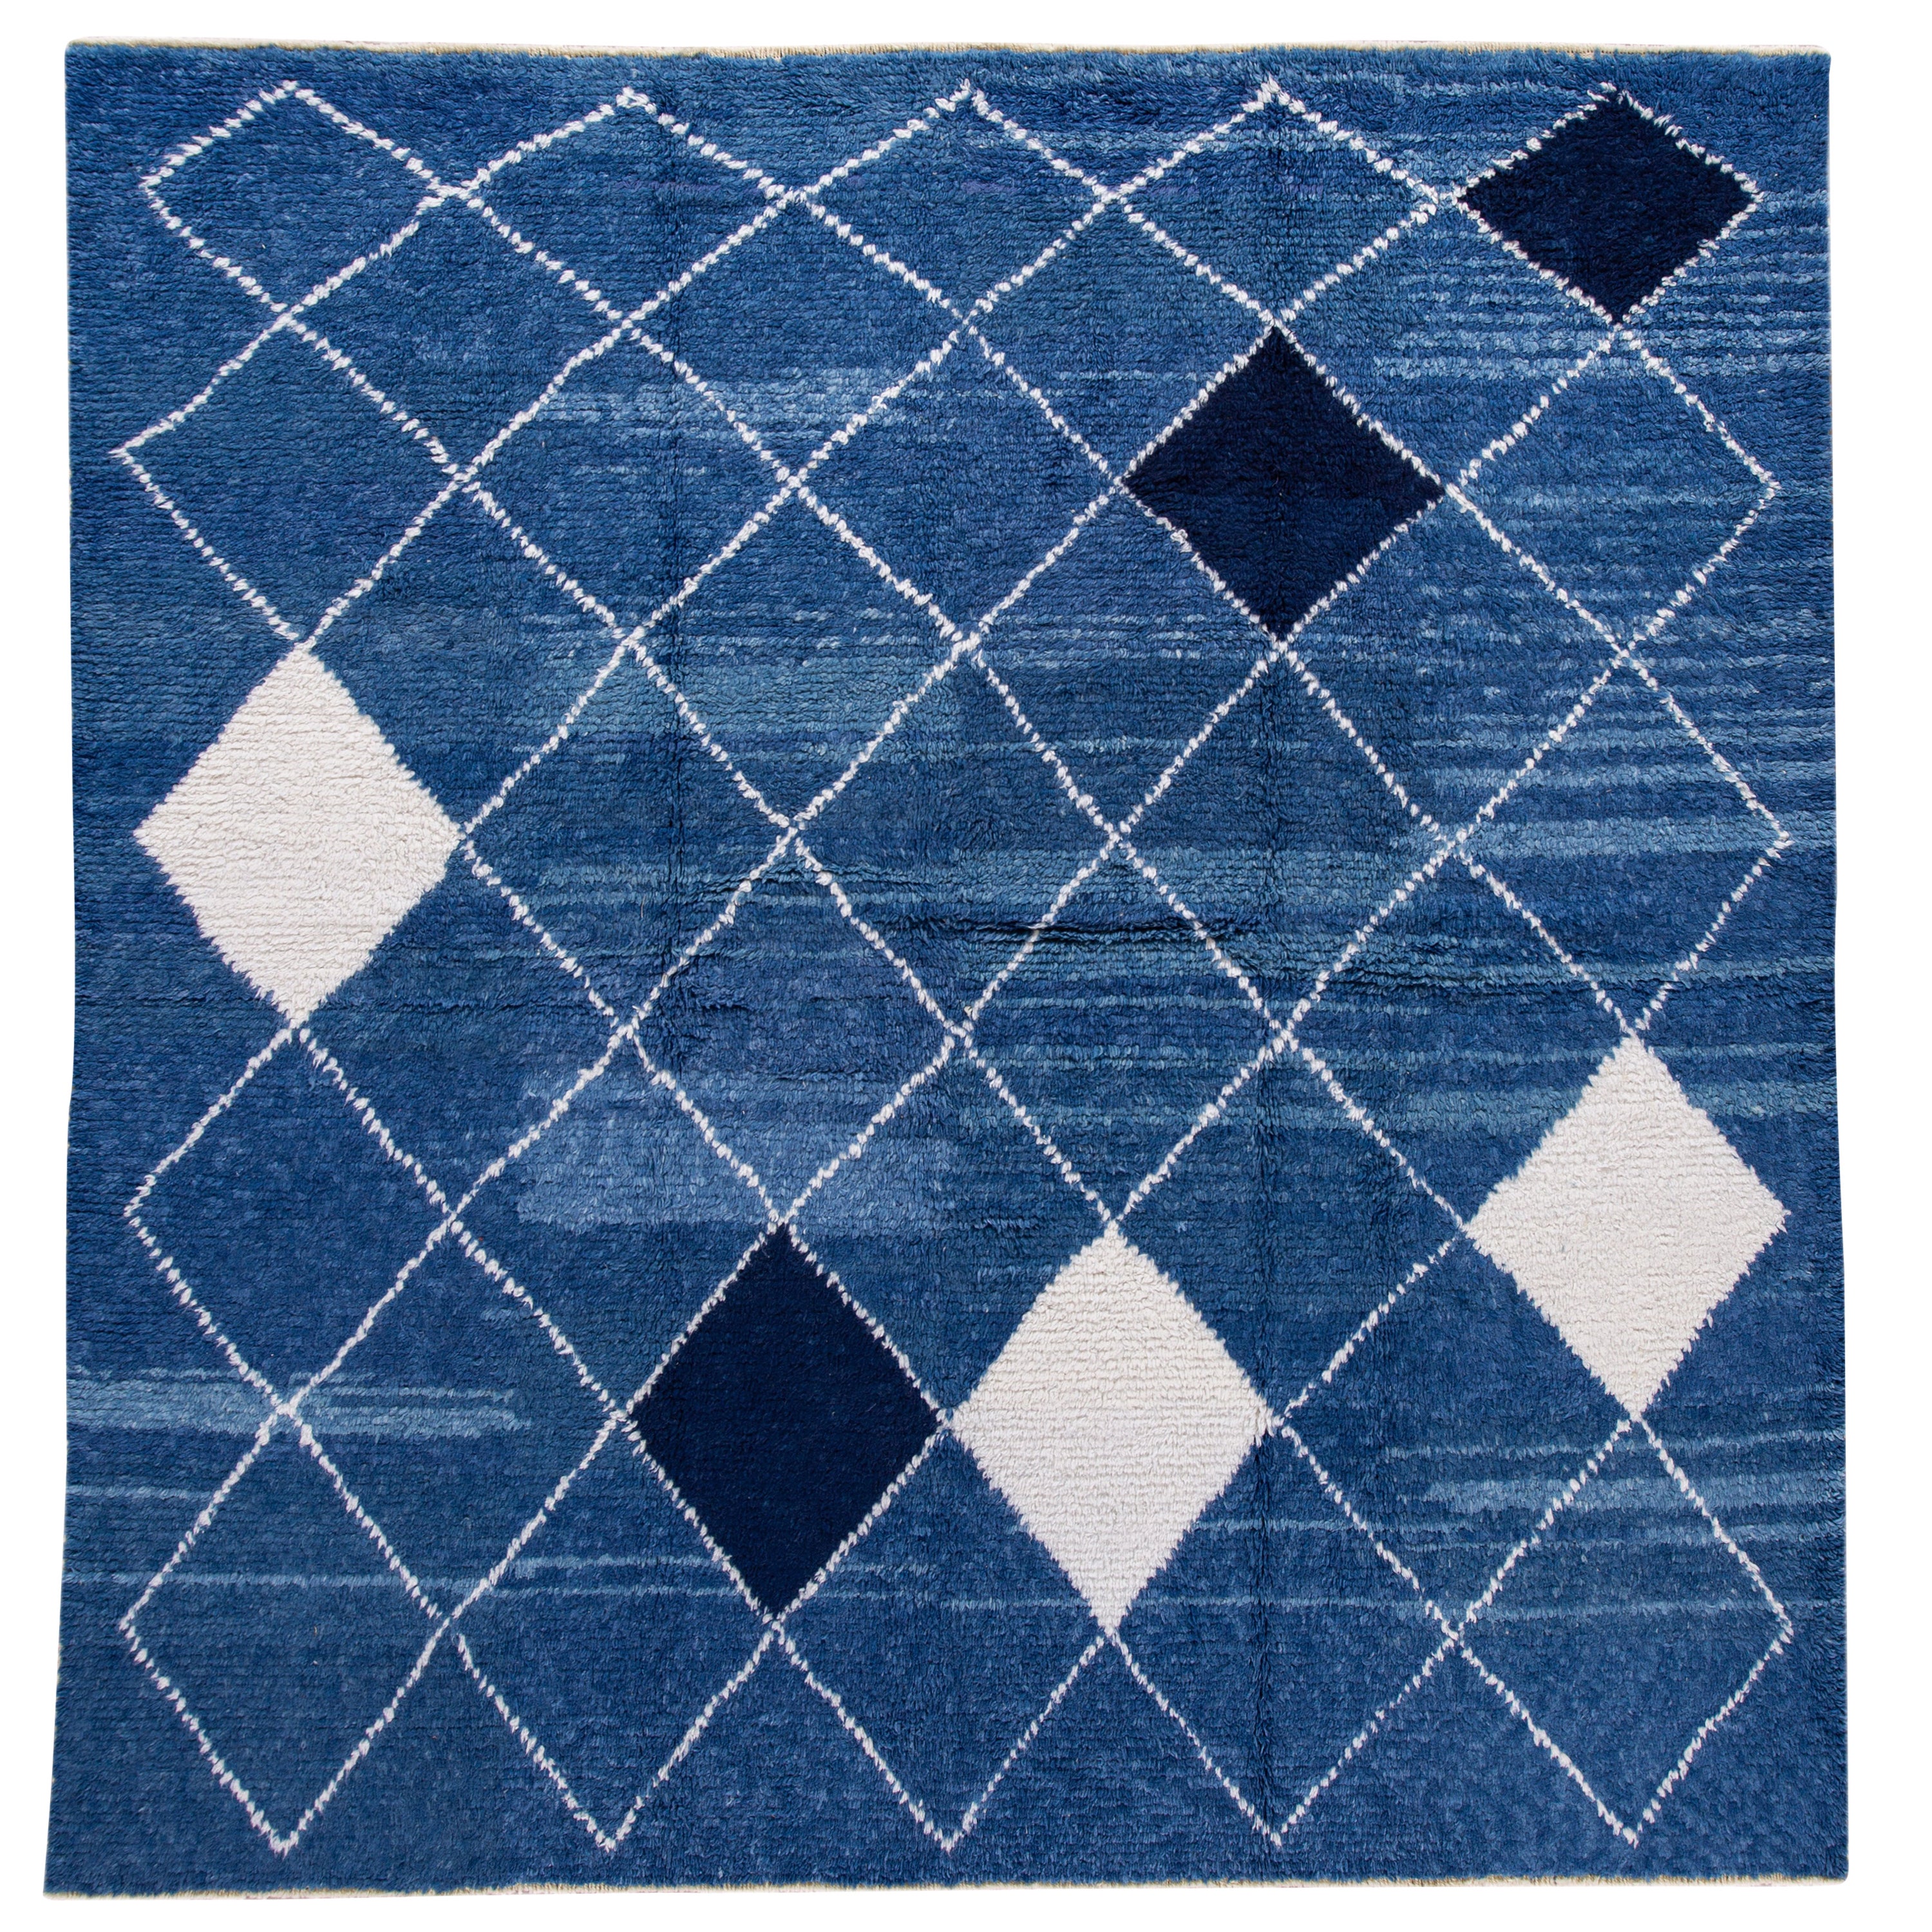 Modern Moroccan Tribal Style Square Wool Rug Handmade in Blue For Sale